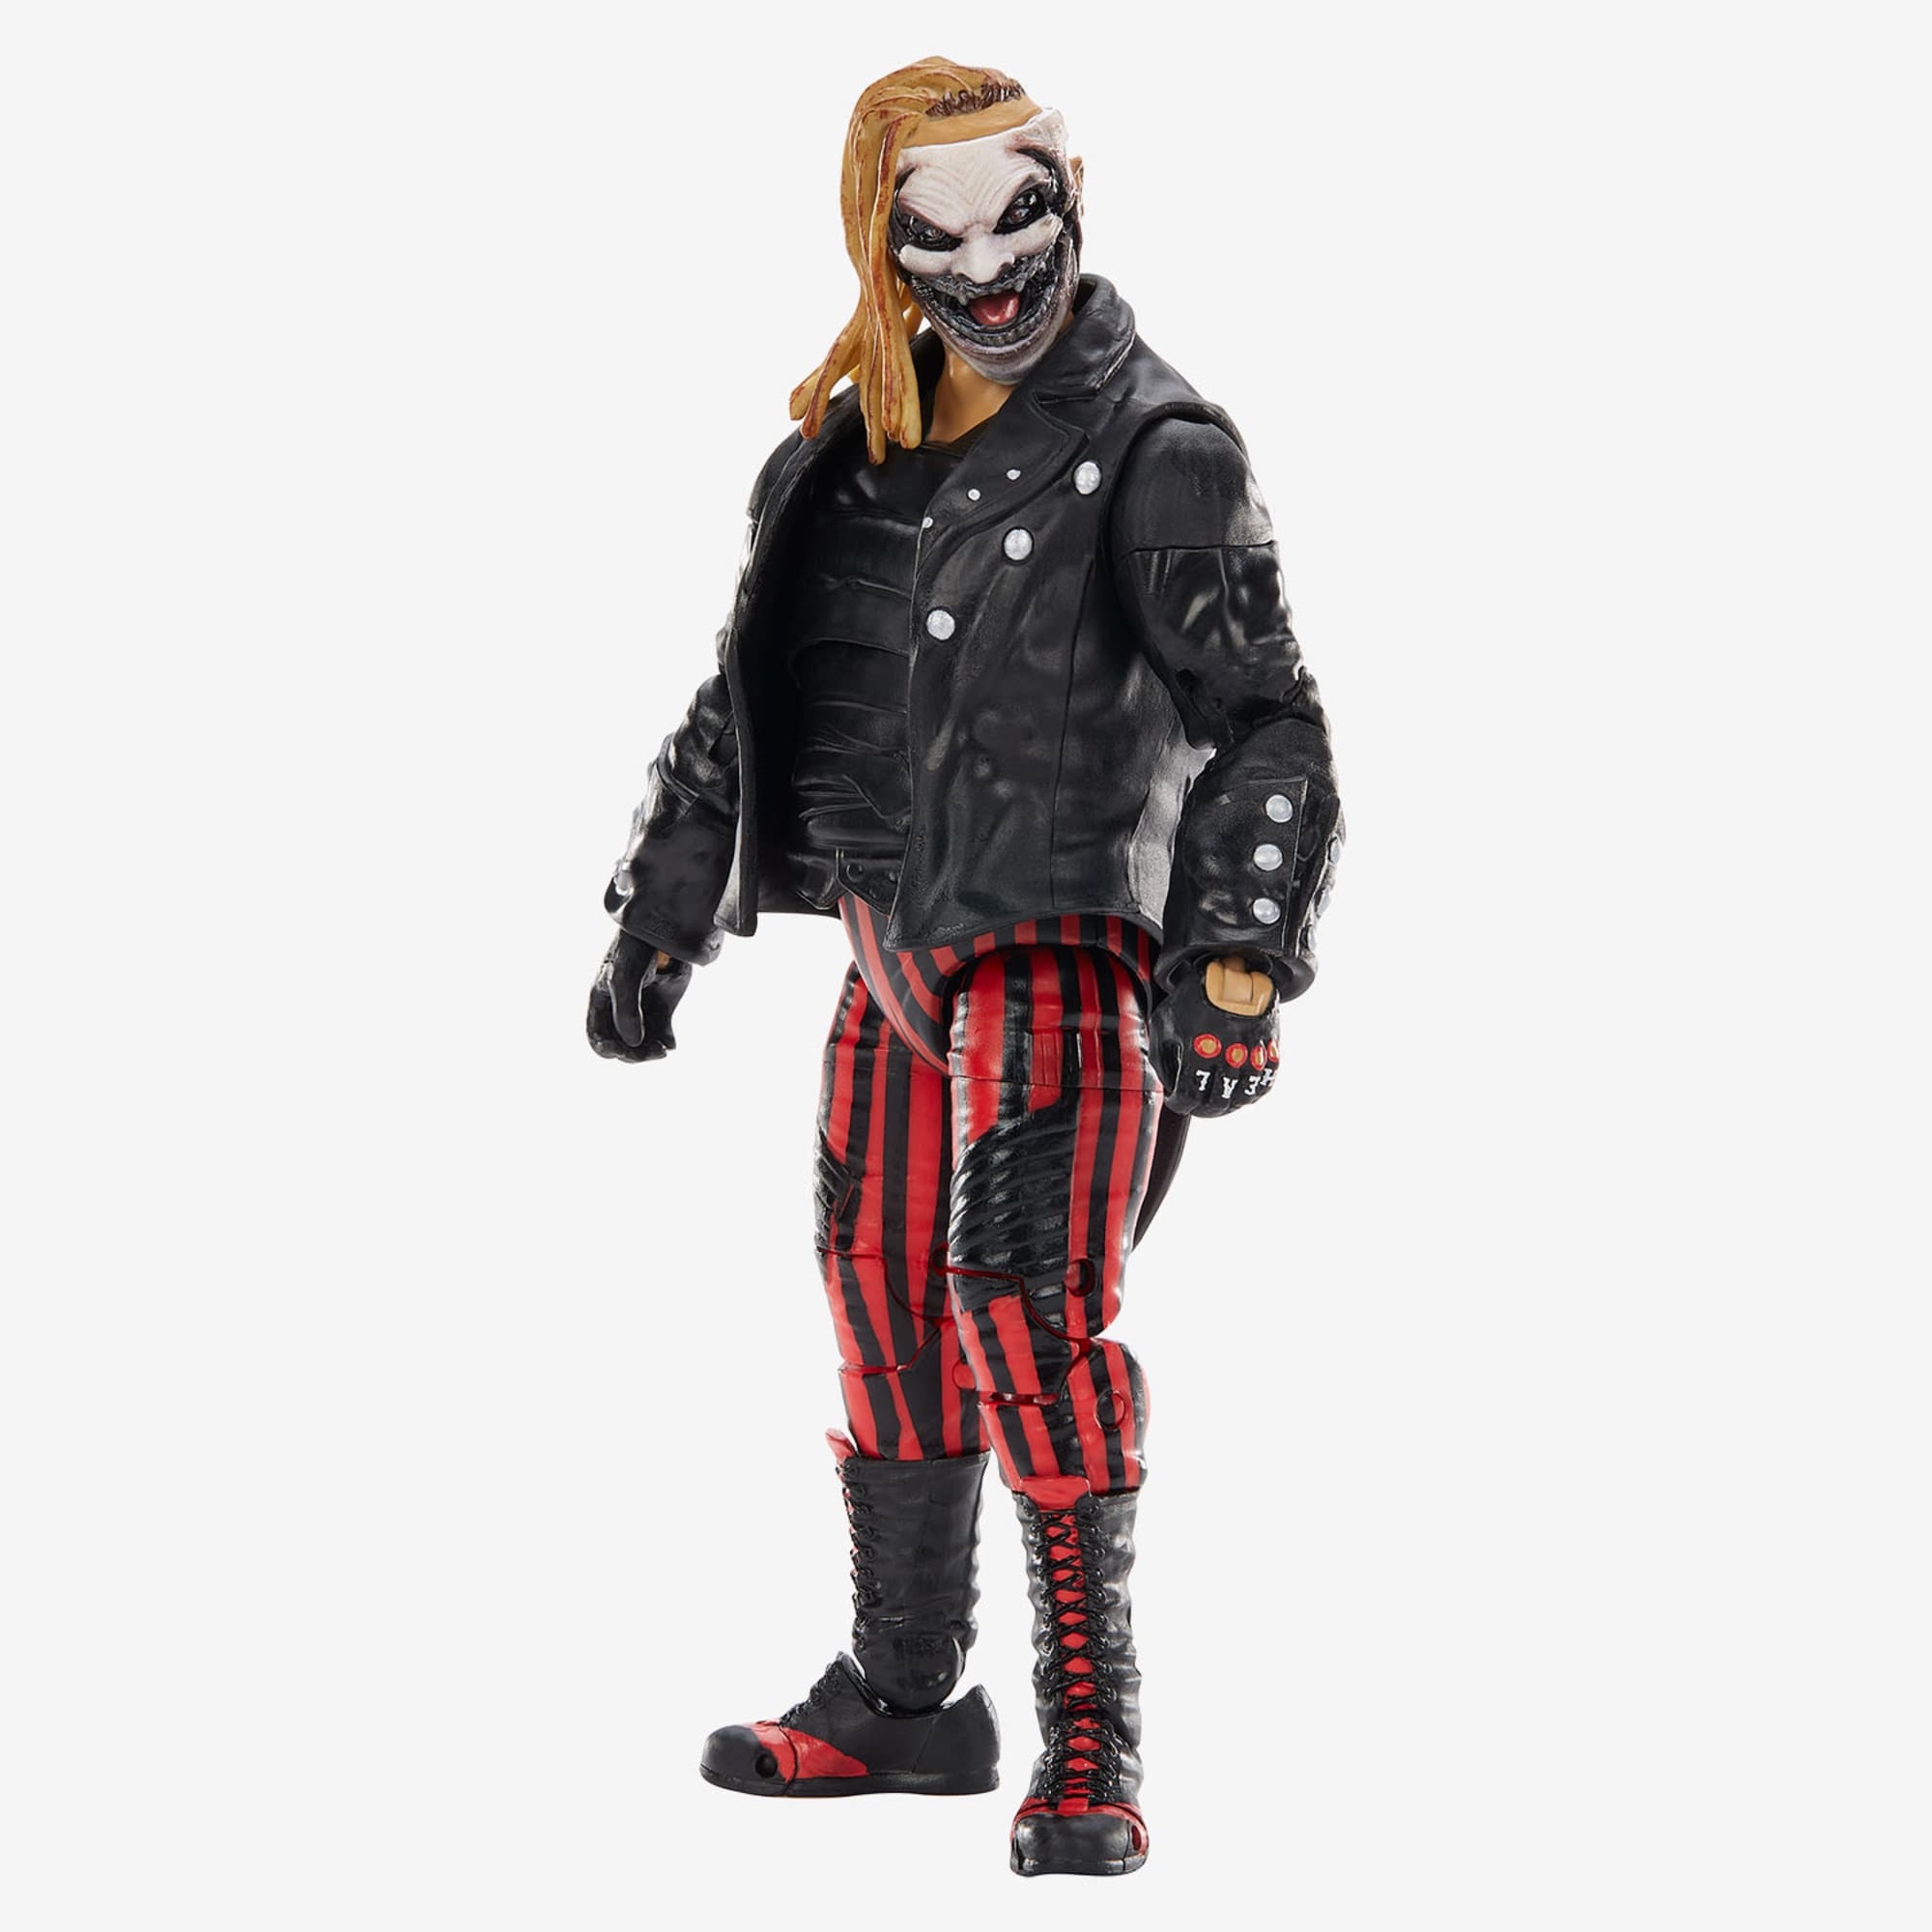 WWE® The Fiend Bray Wyatt™ Ultimate Edition Action Figure